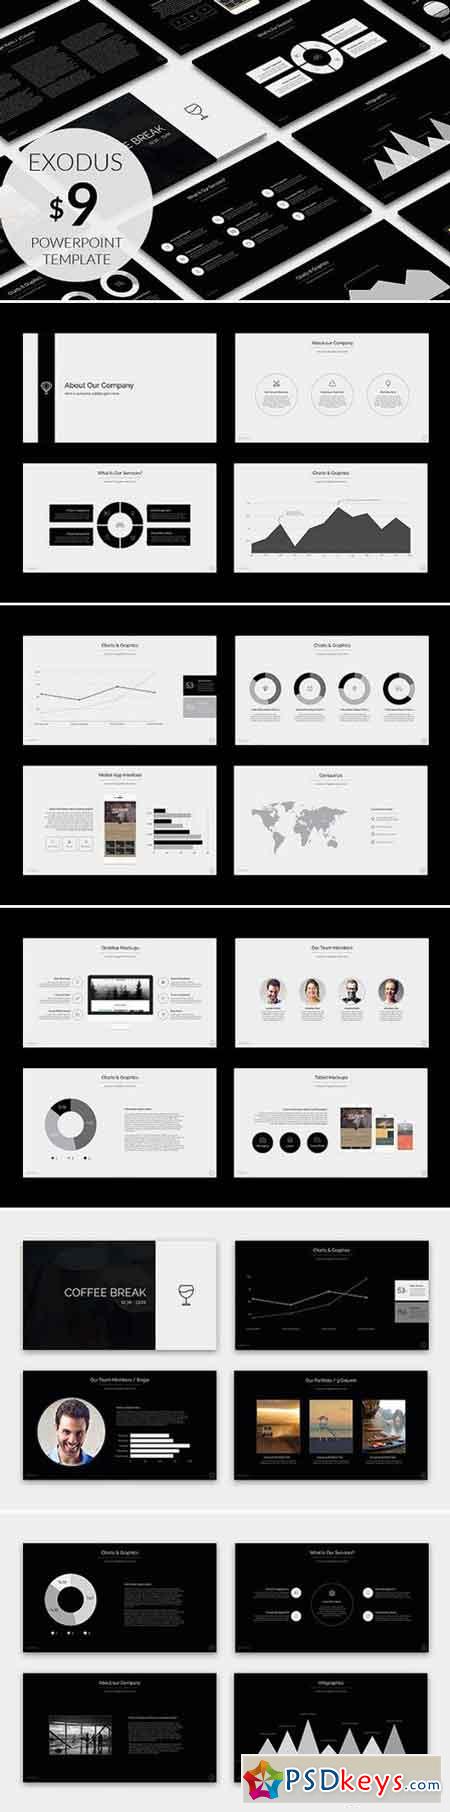 Exodus Powerpoint Template 1079767 » Free Download Photoshop Vector ...